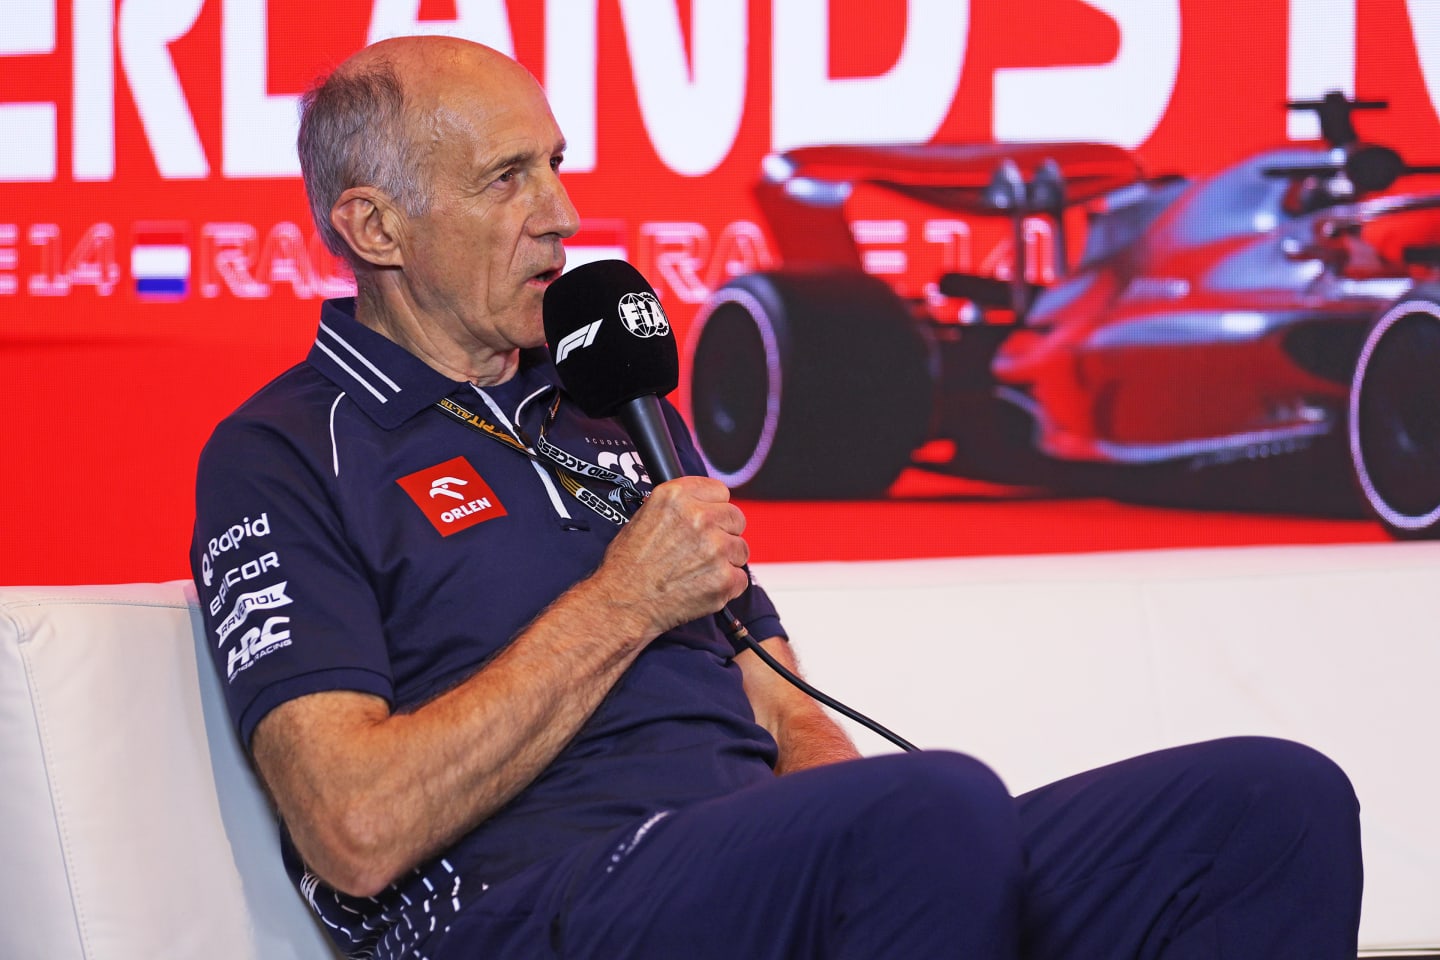 ZANDVOORT, NETHERLANDS - AUGUST 25: Scuderia AlphaTauri Team Principal Franz Tost attends the Team Principals Press Conference during practice ahead of the F1 Grand Prix of The Netherlands at Circuit Zandvoort on August 25, 2023 in Zandvoort, Netherlands. (Photo by Dean Mouhtaropoulos/Getty Images)